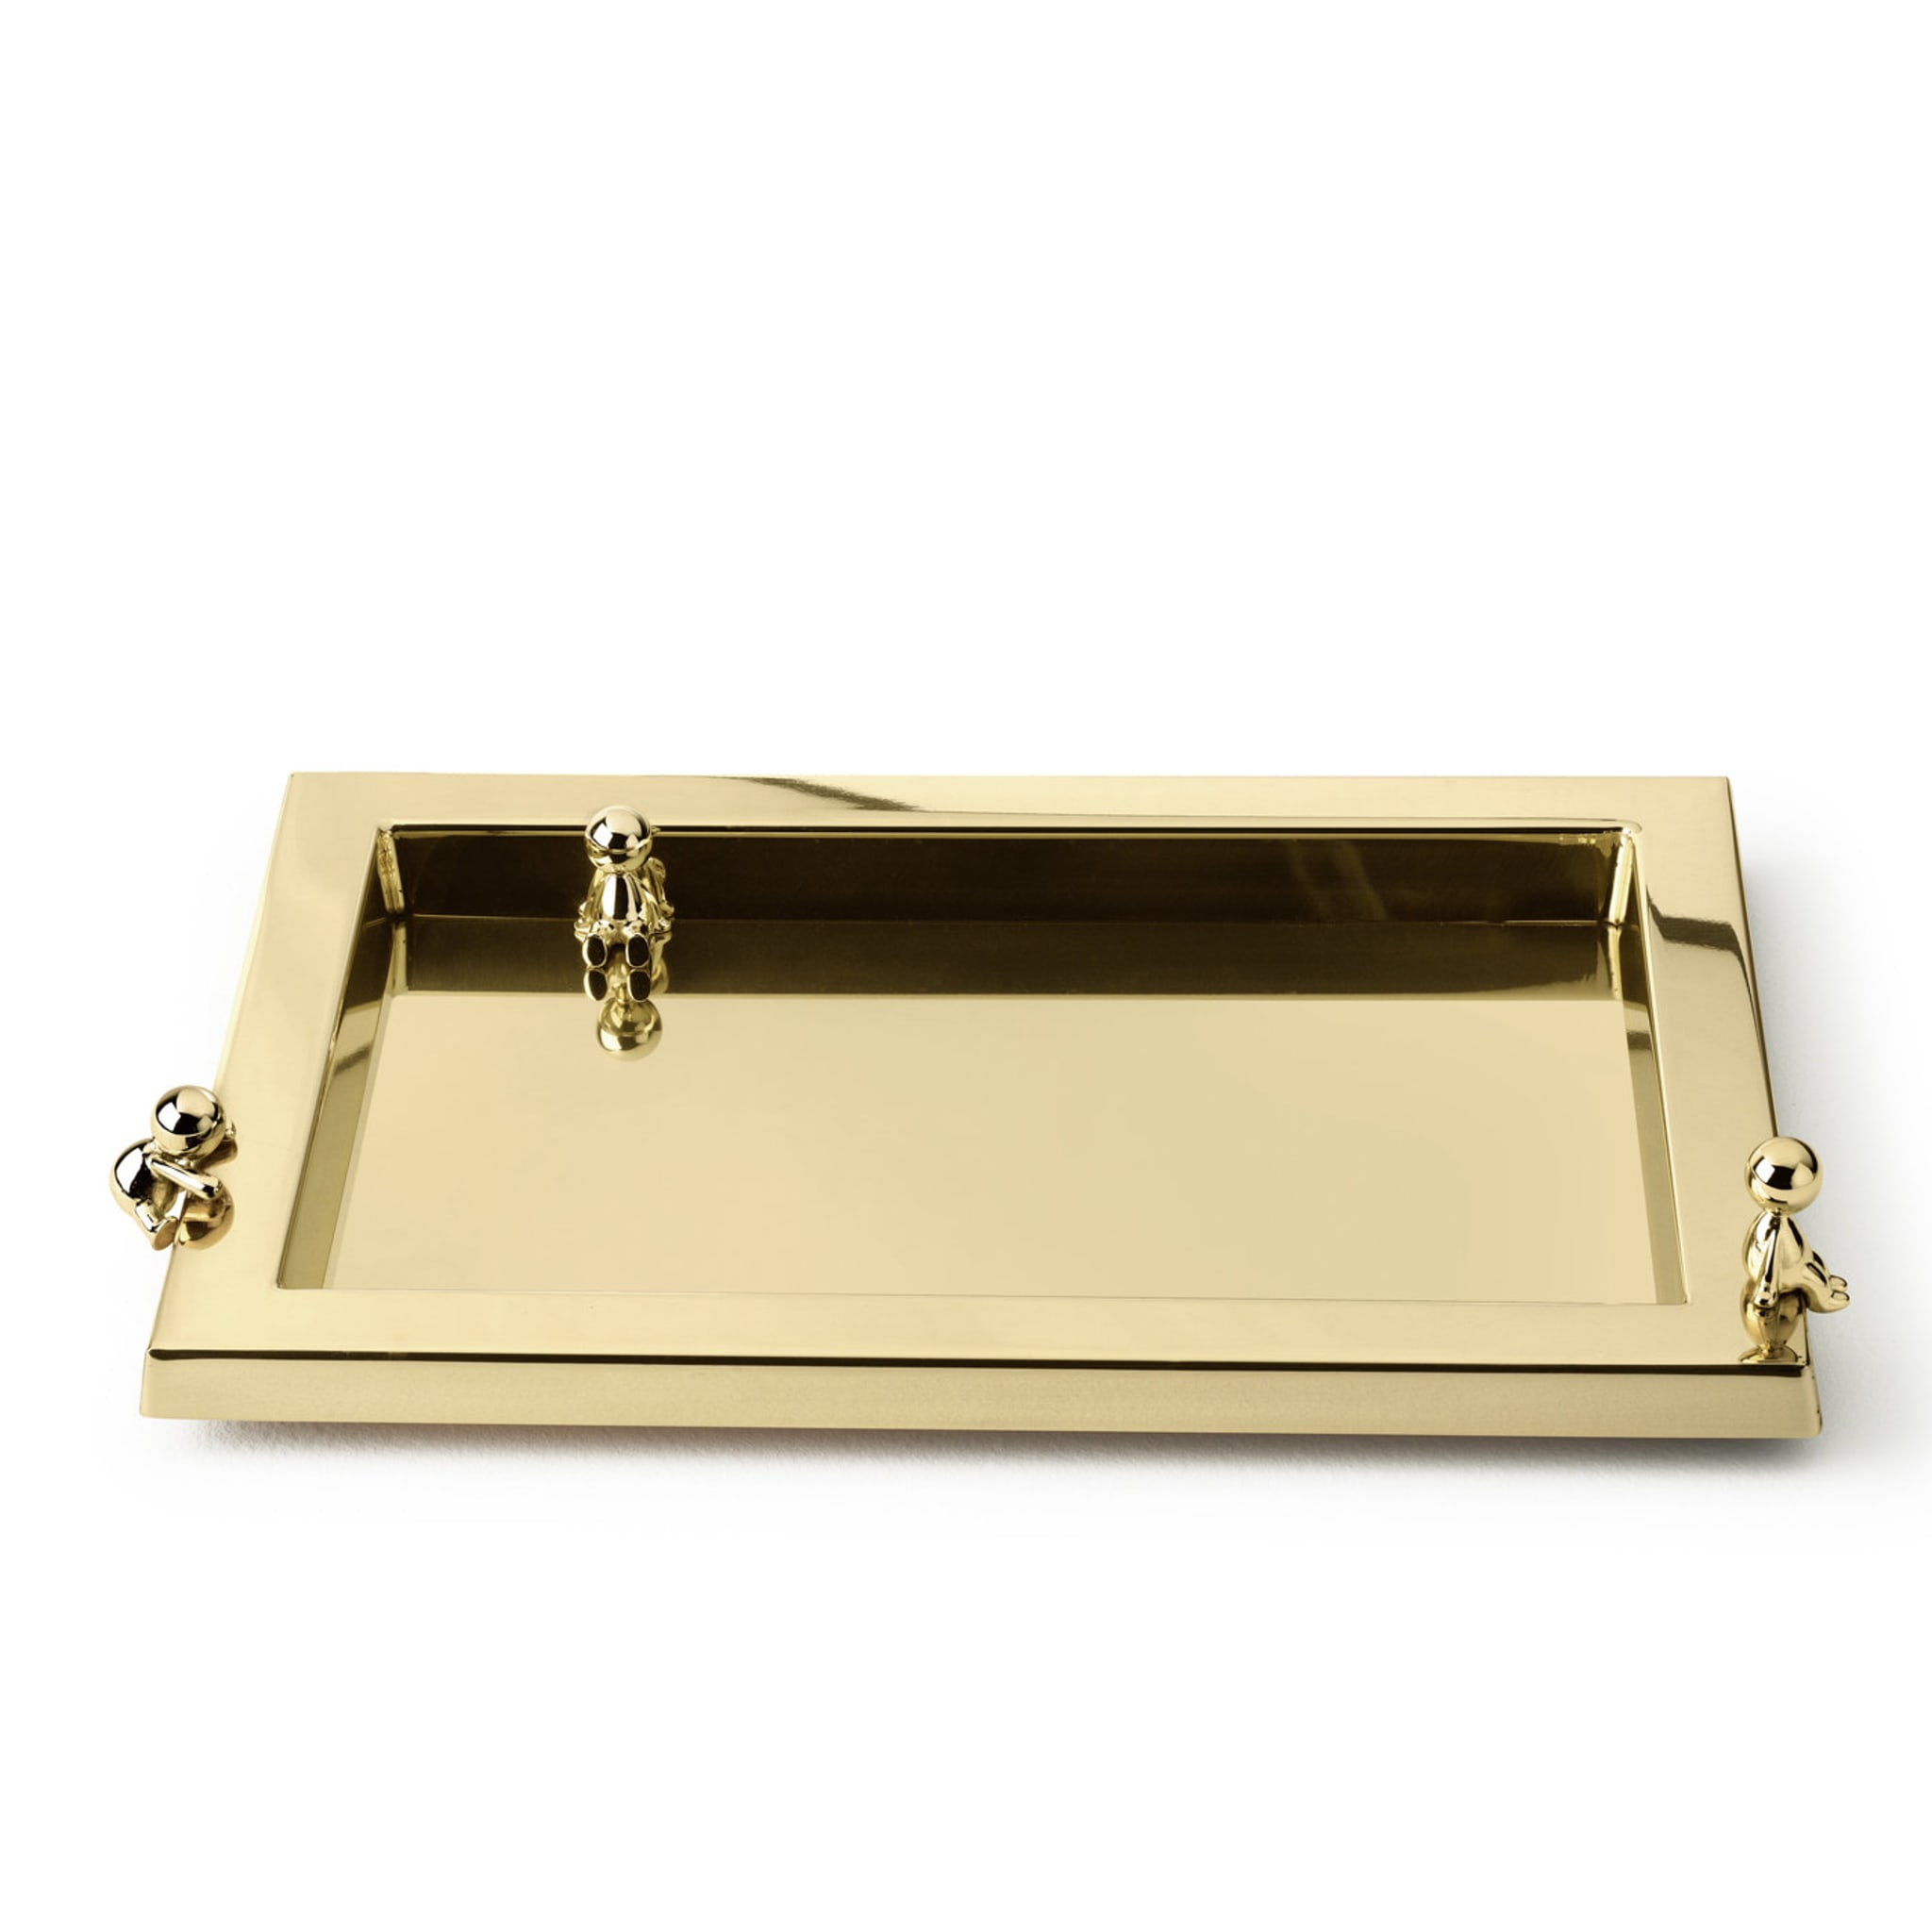 Omini Tray in Polished Brass By Stefano Giovannoni - Alternative view 1